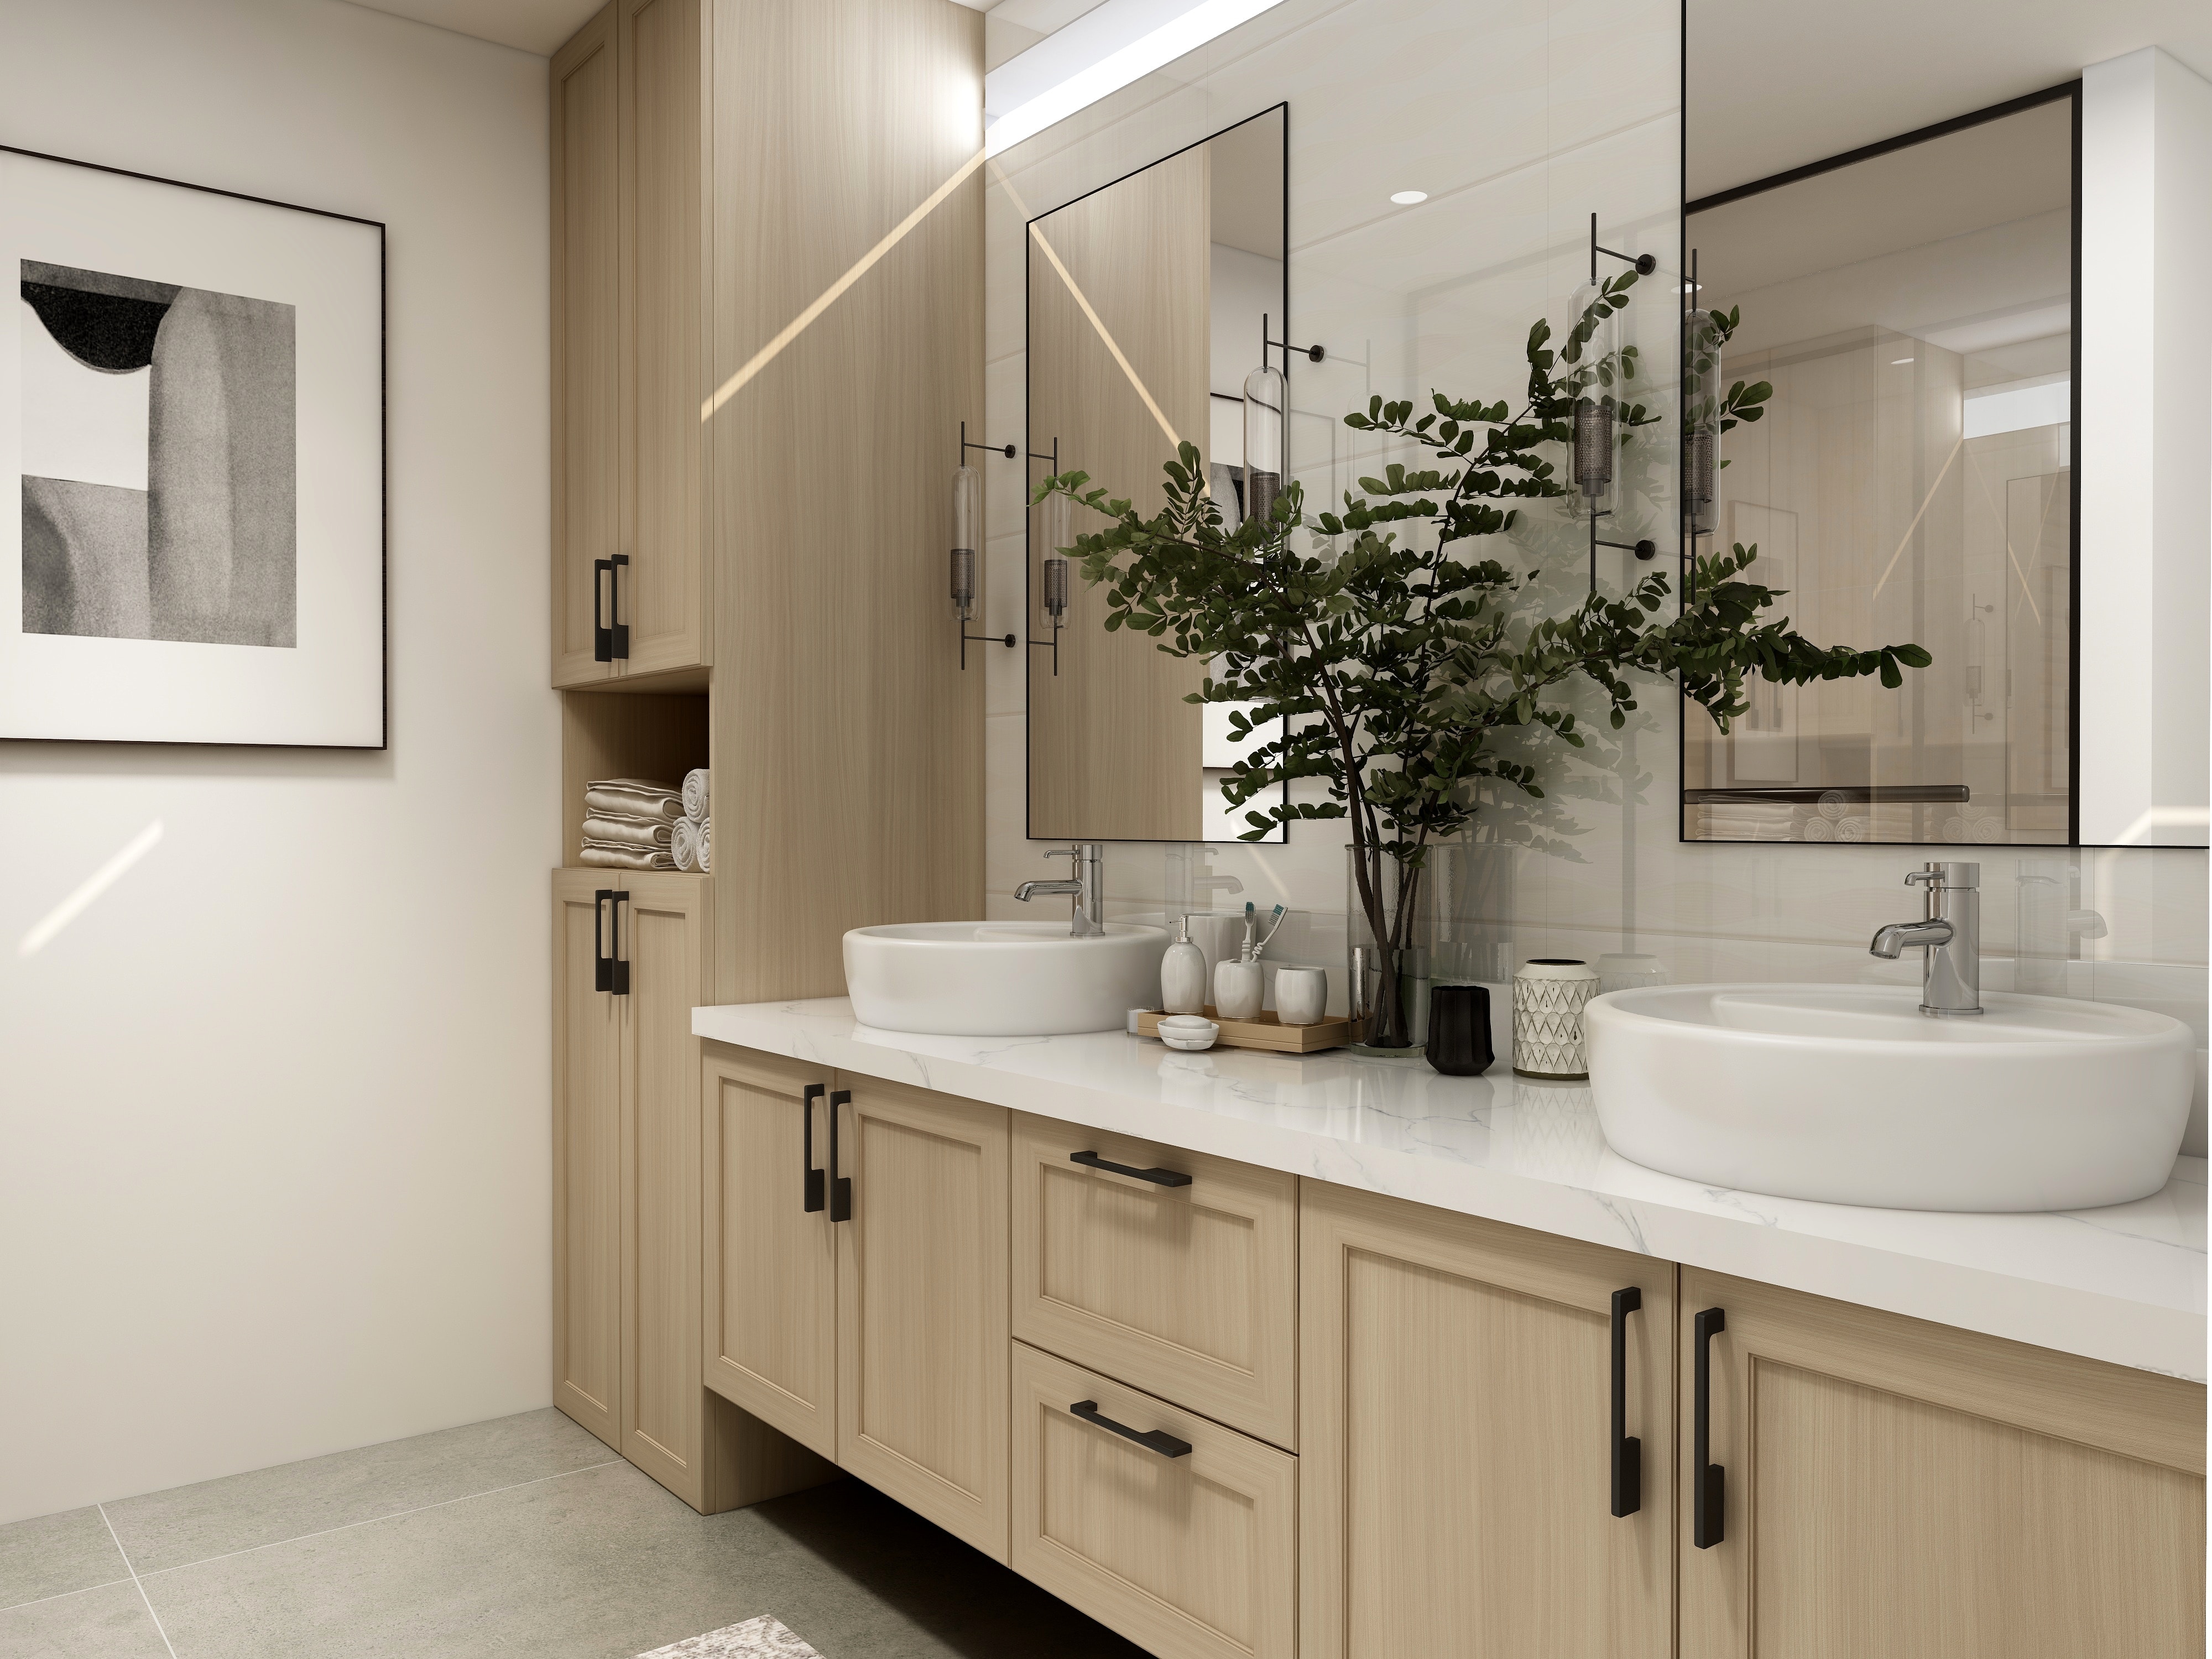 warm natural bathroom. Double sinks above on the counter and white countertops. There's a floor-to-ceiling cabinet and a plant separating the two sinks.